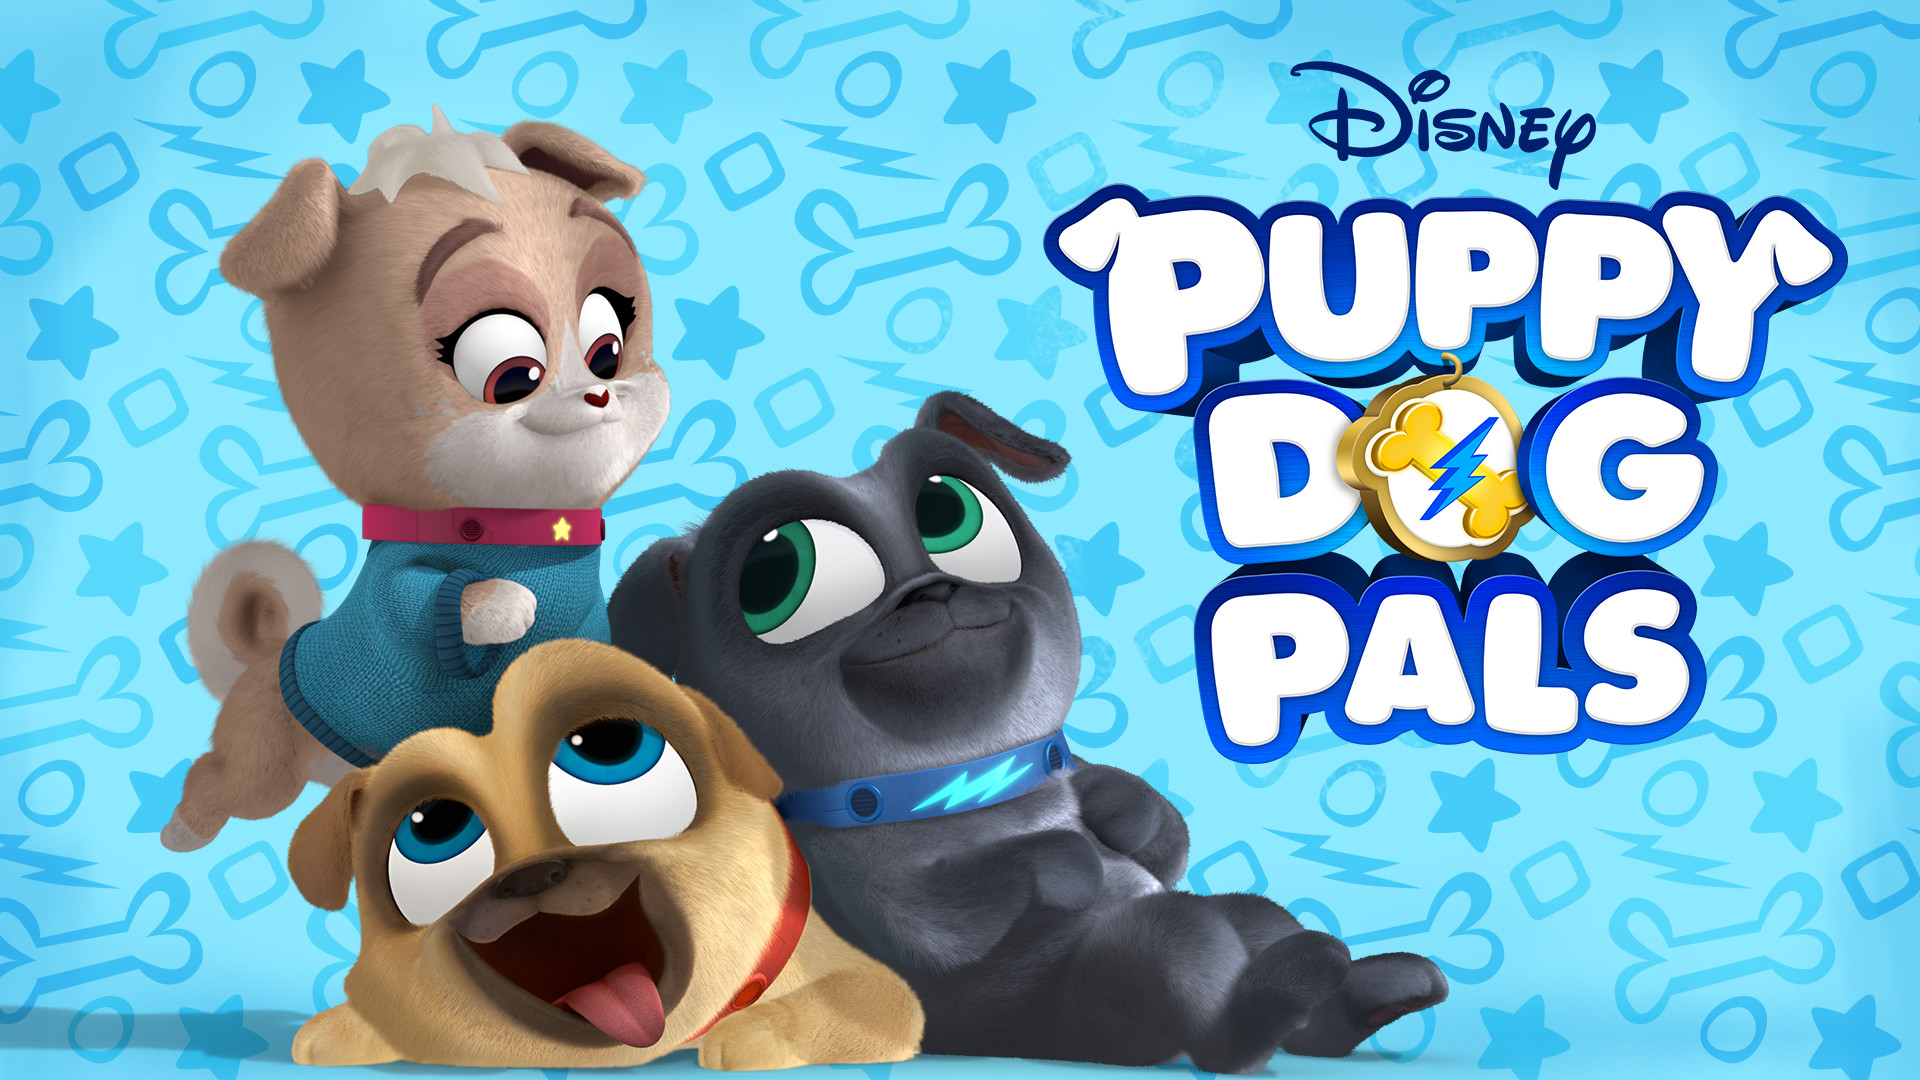 The Best Puppy Dog Pals Wallpaper for You!